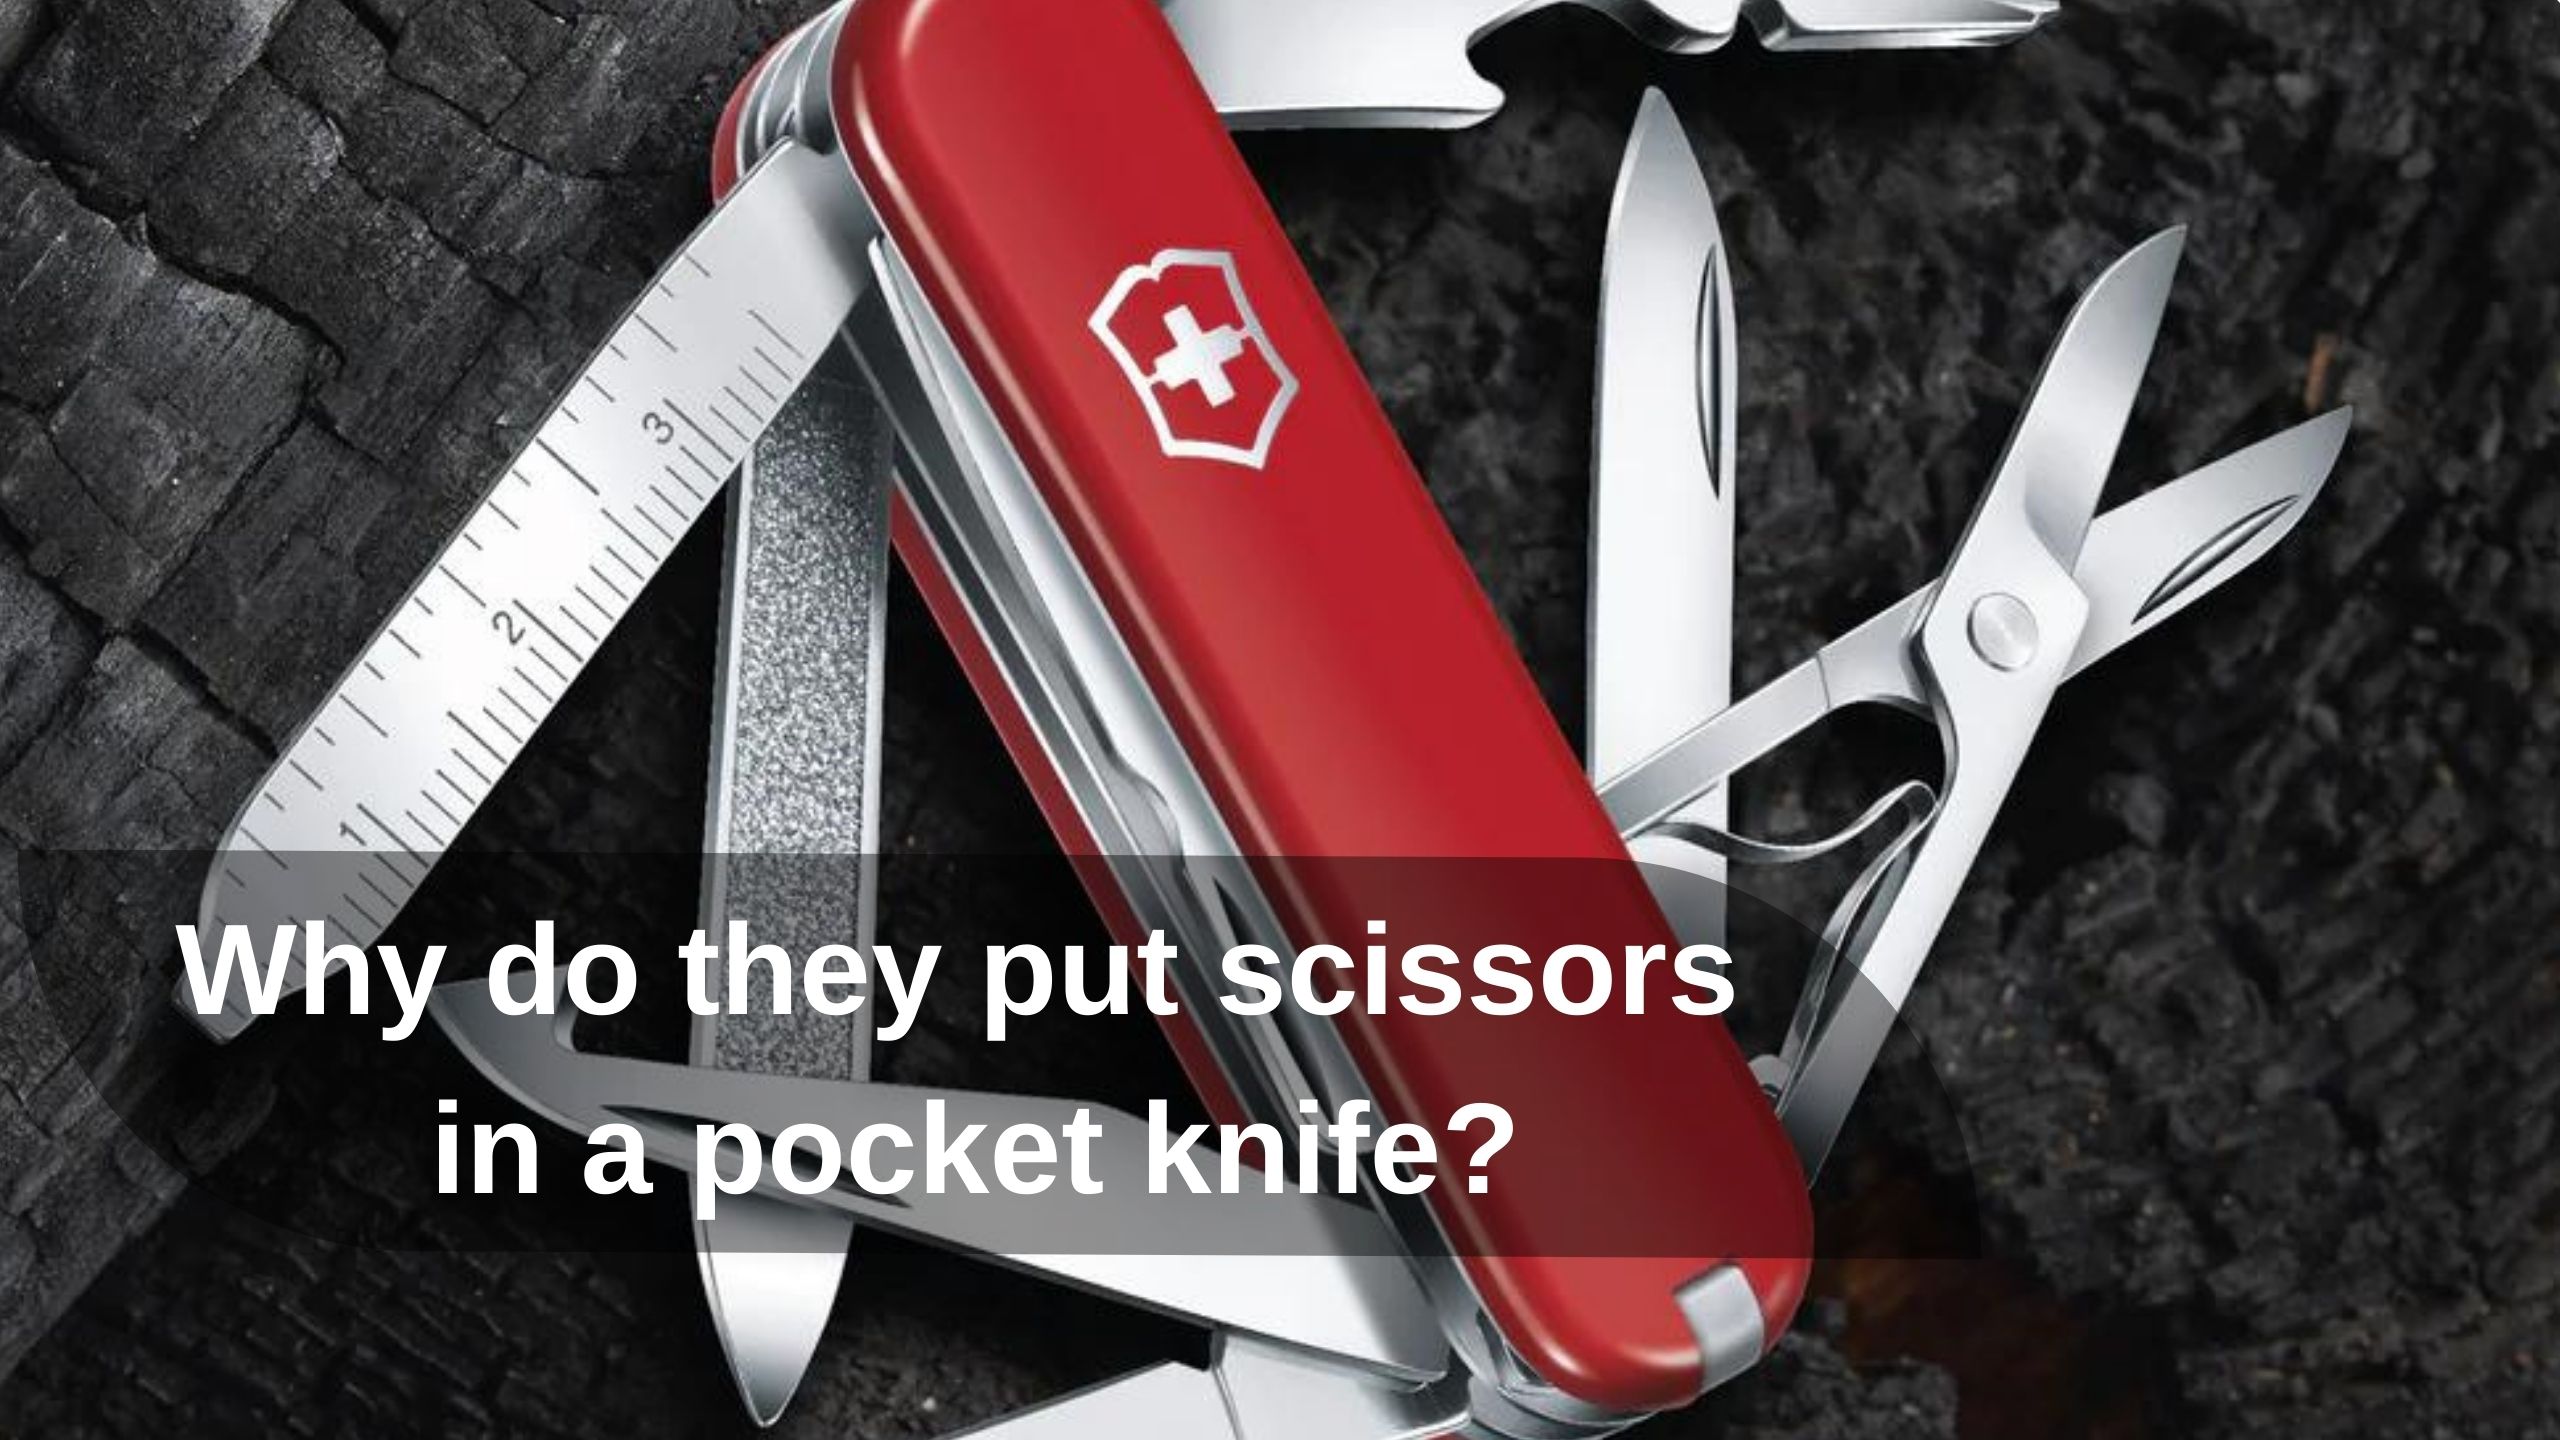 Why do they put scissors in a pocket knife?